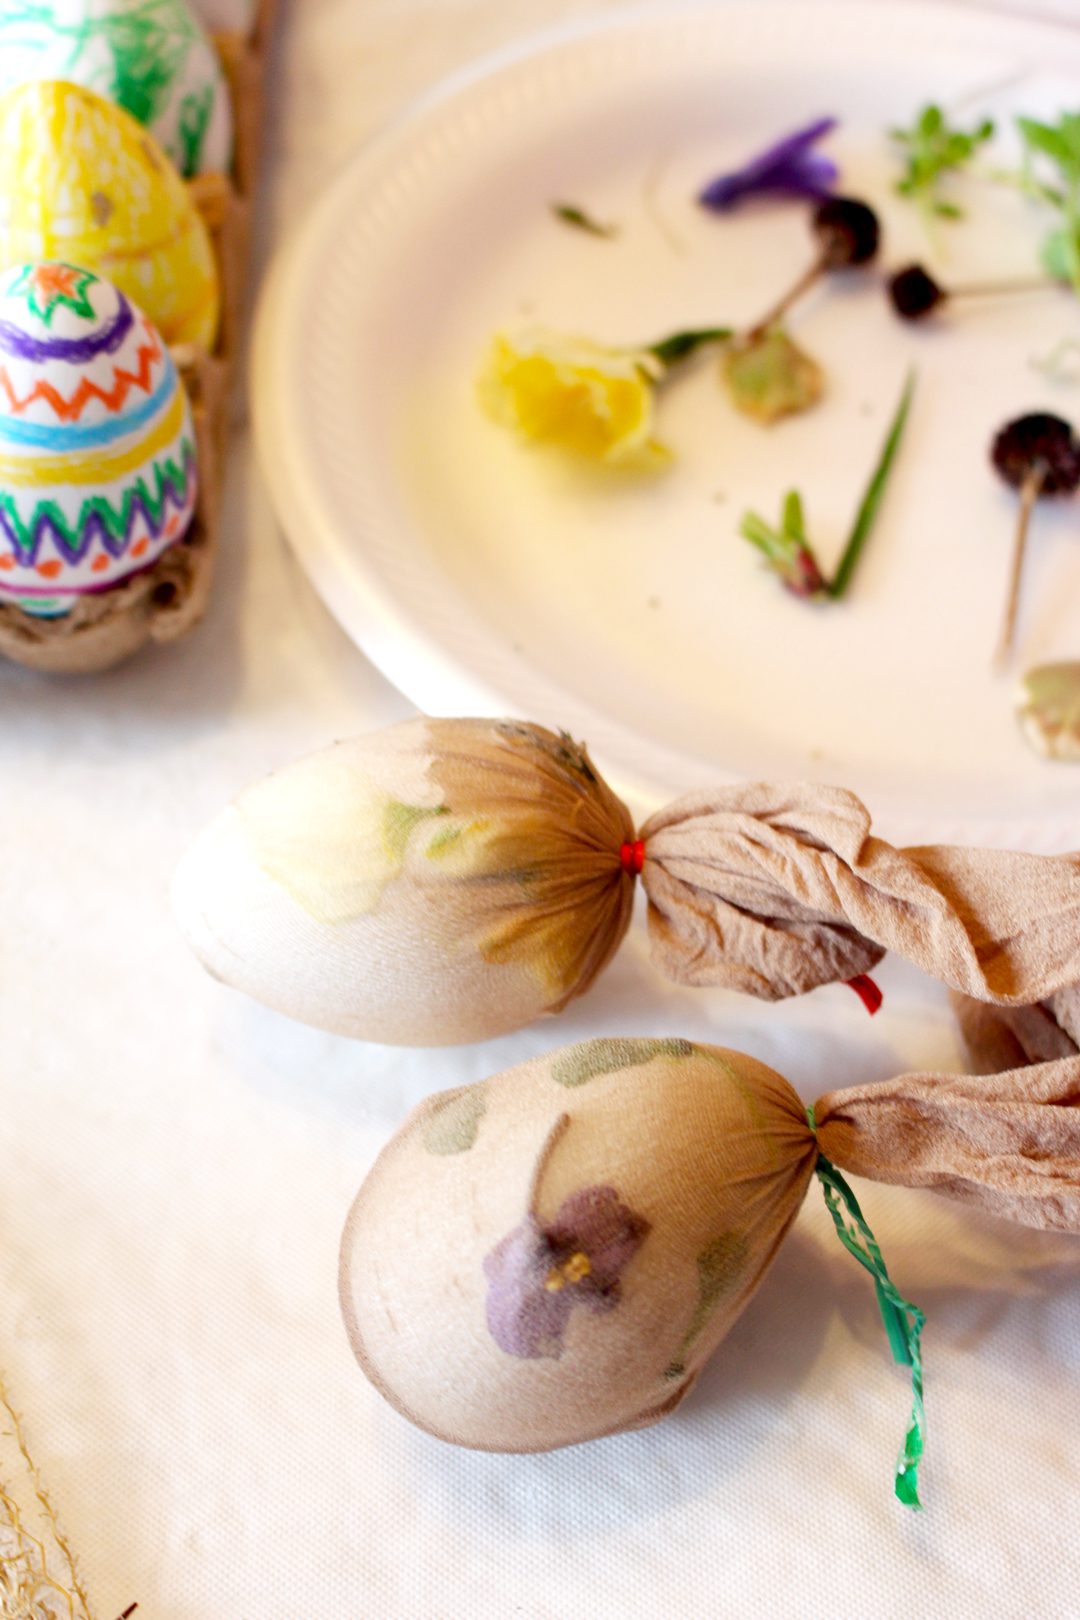 Panty hose wrapped around easter eggs and flowers, ready to dye.